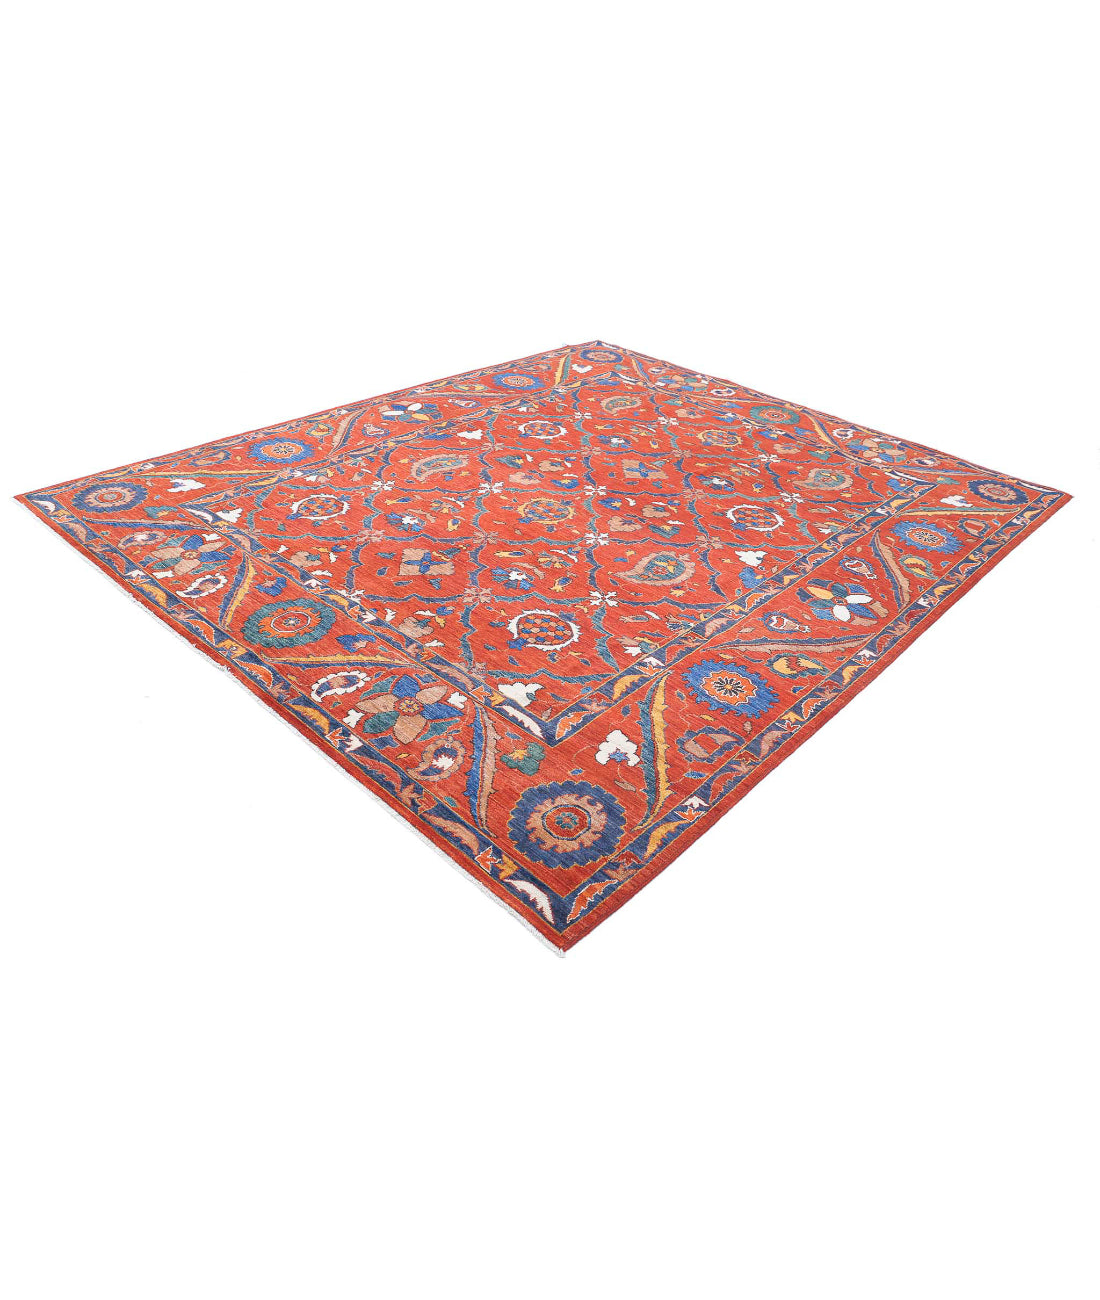 Hand Knotted Nomadic Caucasian Humna Wool Rug - 8'4'' x 10'1'' 8'4'' x 10'1'' (250 X 303) / Red / Blue